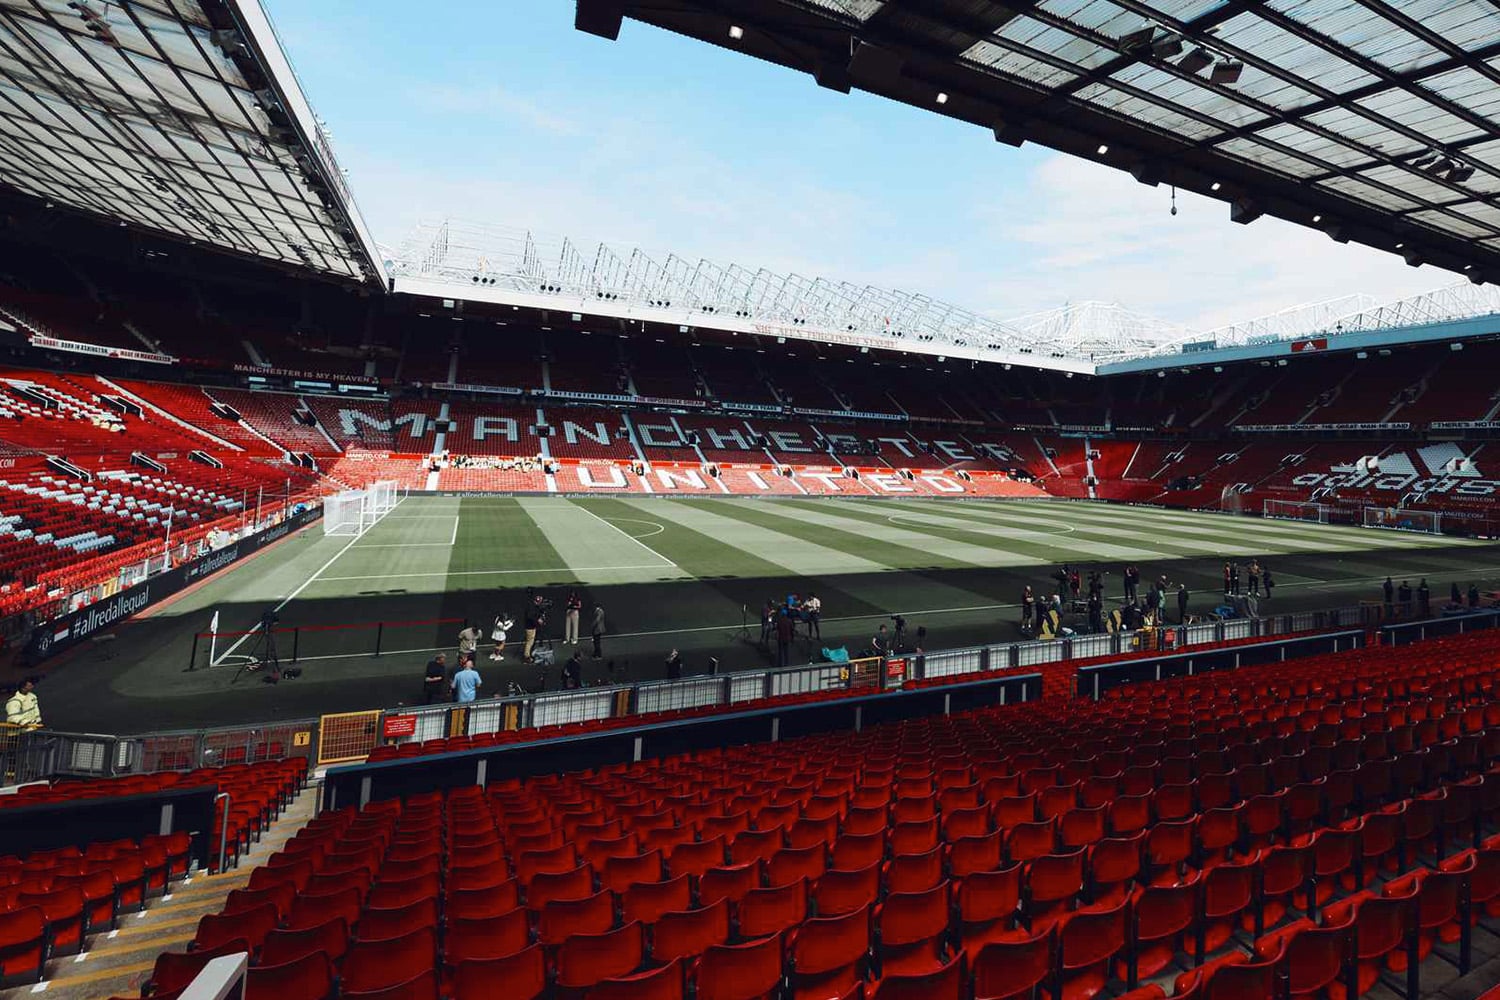 A view of the inside of Manchester United's Old Trafford.